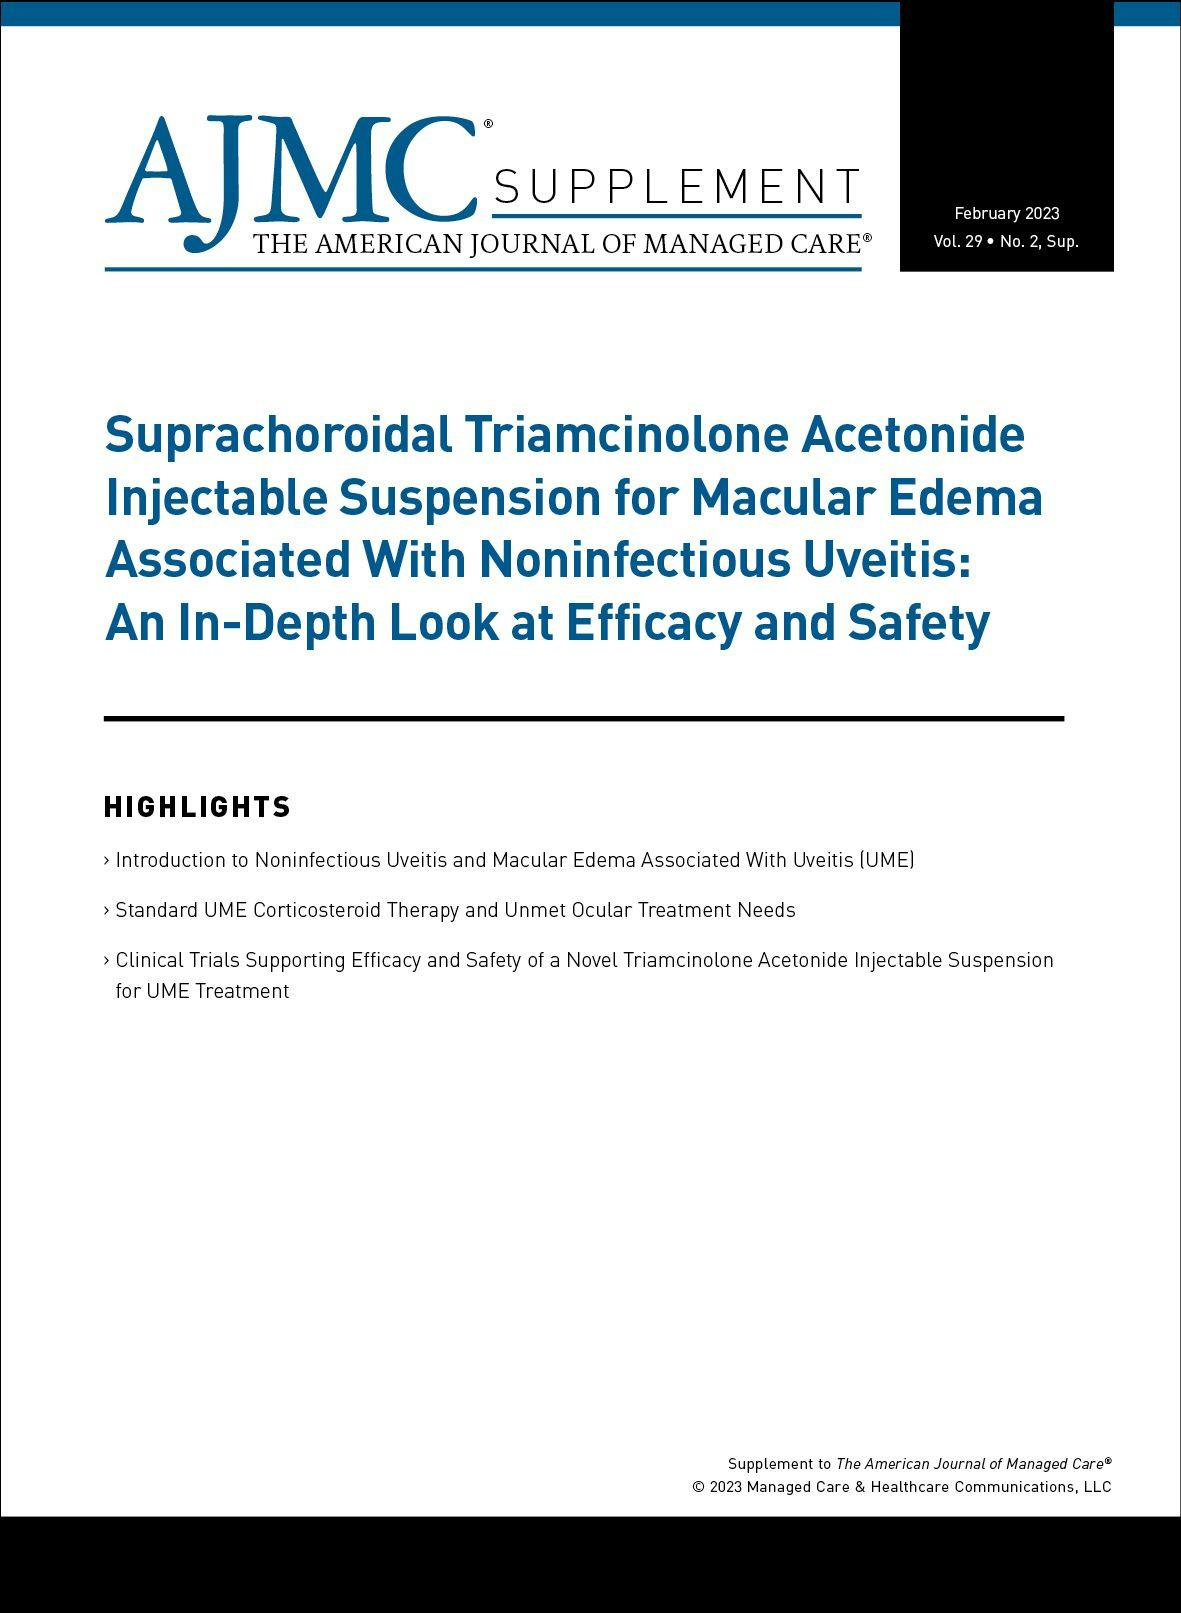 Suprachoroidal Triamcinolone Acetonide Injectable Suspension for Macular Edema Associated With Noninfectious Uveitis: An In-Depth Look at Efficacy and Safety